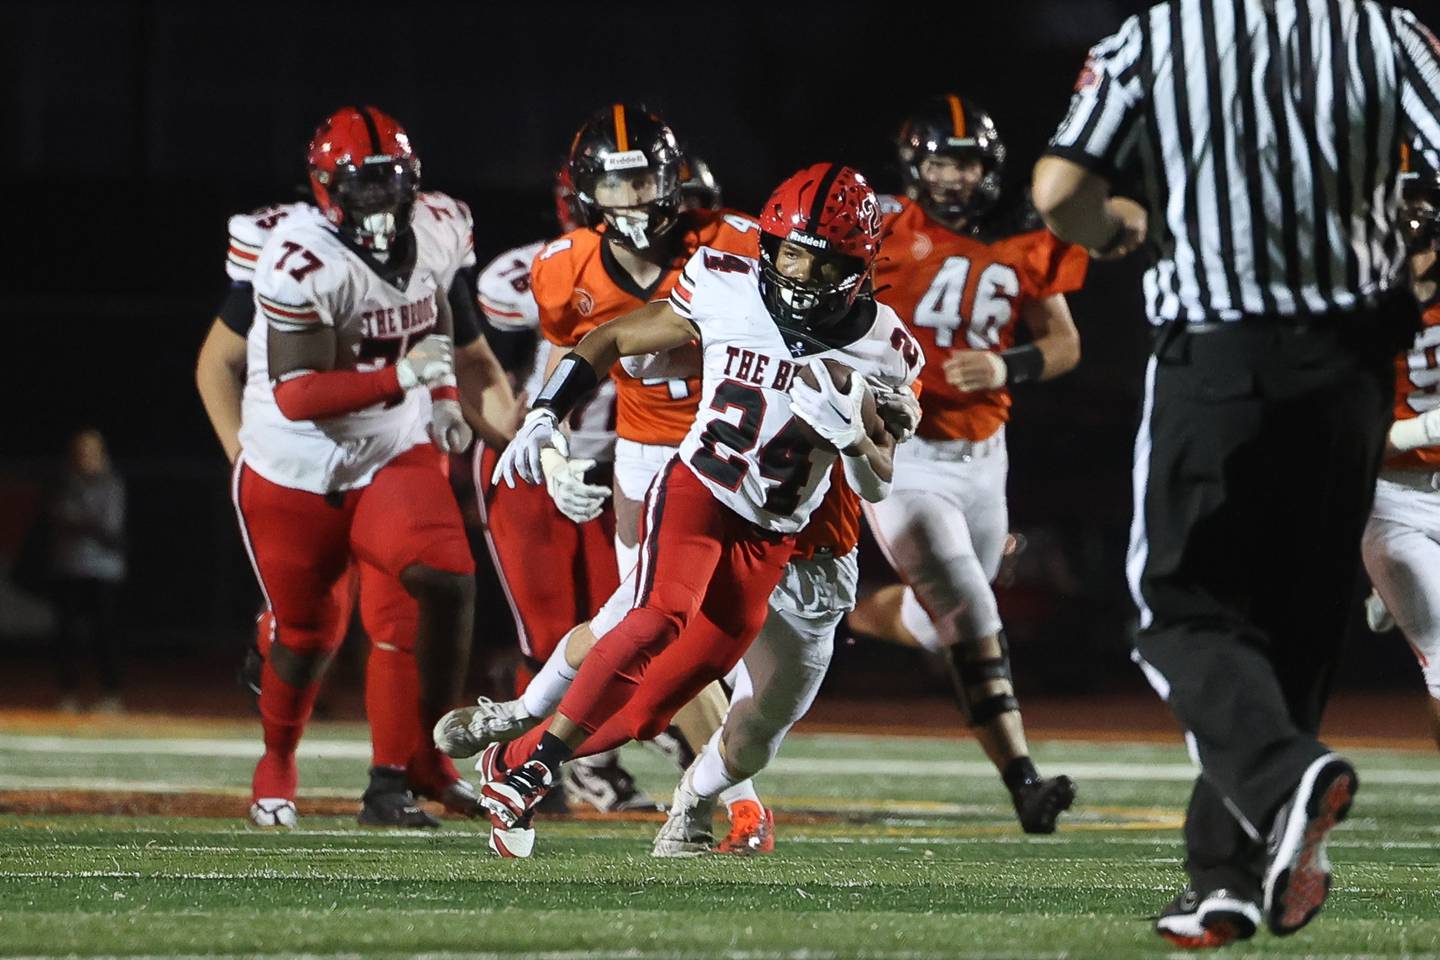 Bolingbrook’s Kale Cooks finds open field on a run against Lincoln-Way West on Friday, Sept. 22 in New Lenox.